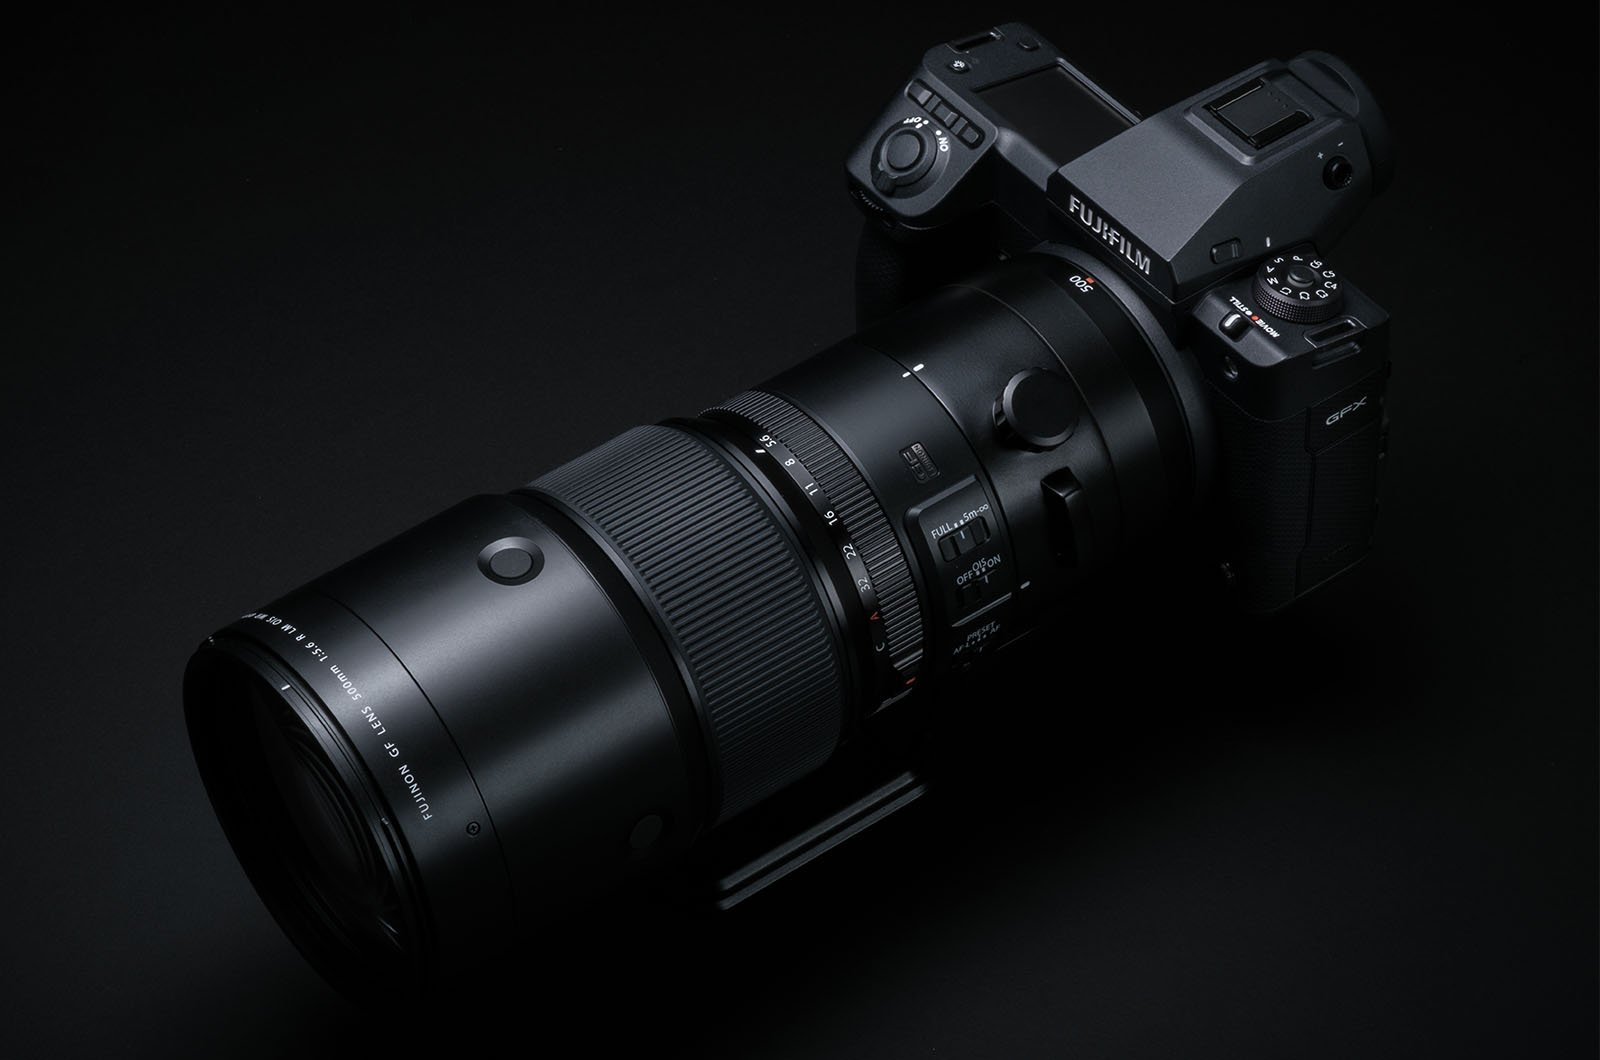 A sleek black Fujifilm camera with a large, extended zoom lens attached is displayed on a black surface with a black background. The camera features various control dials, buttons, and a digital screen, highlighting its professional-grade design.